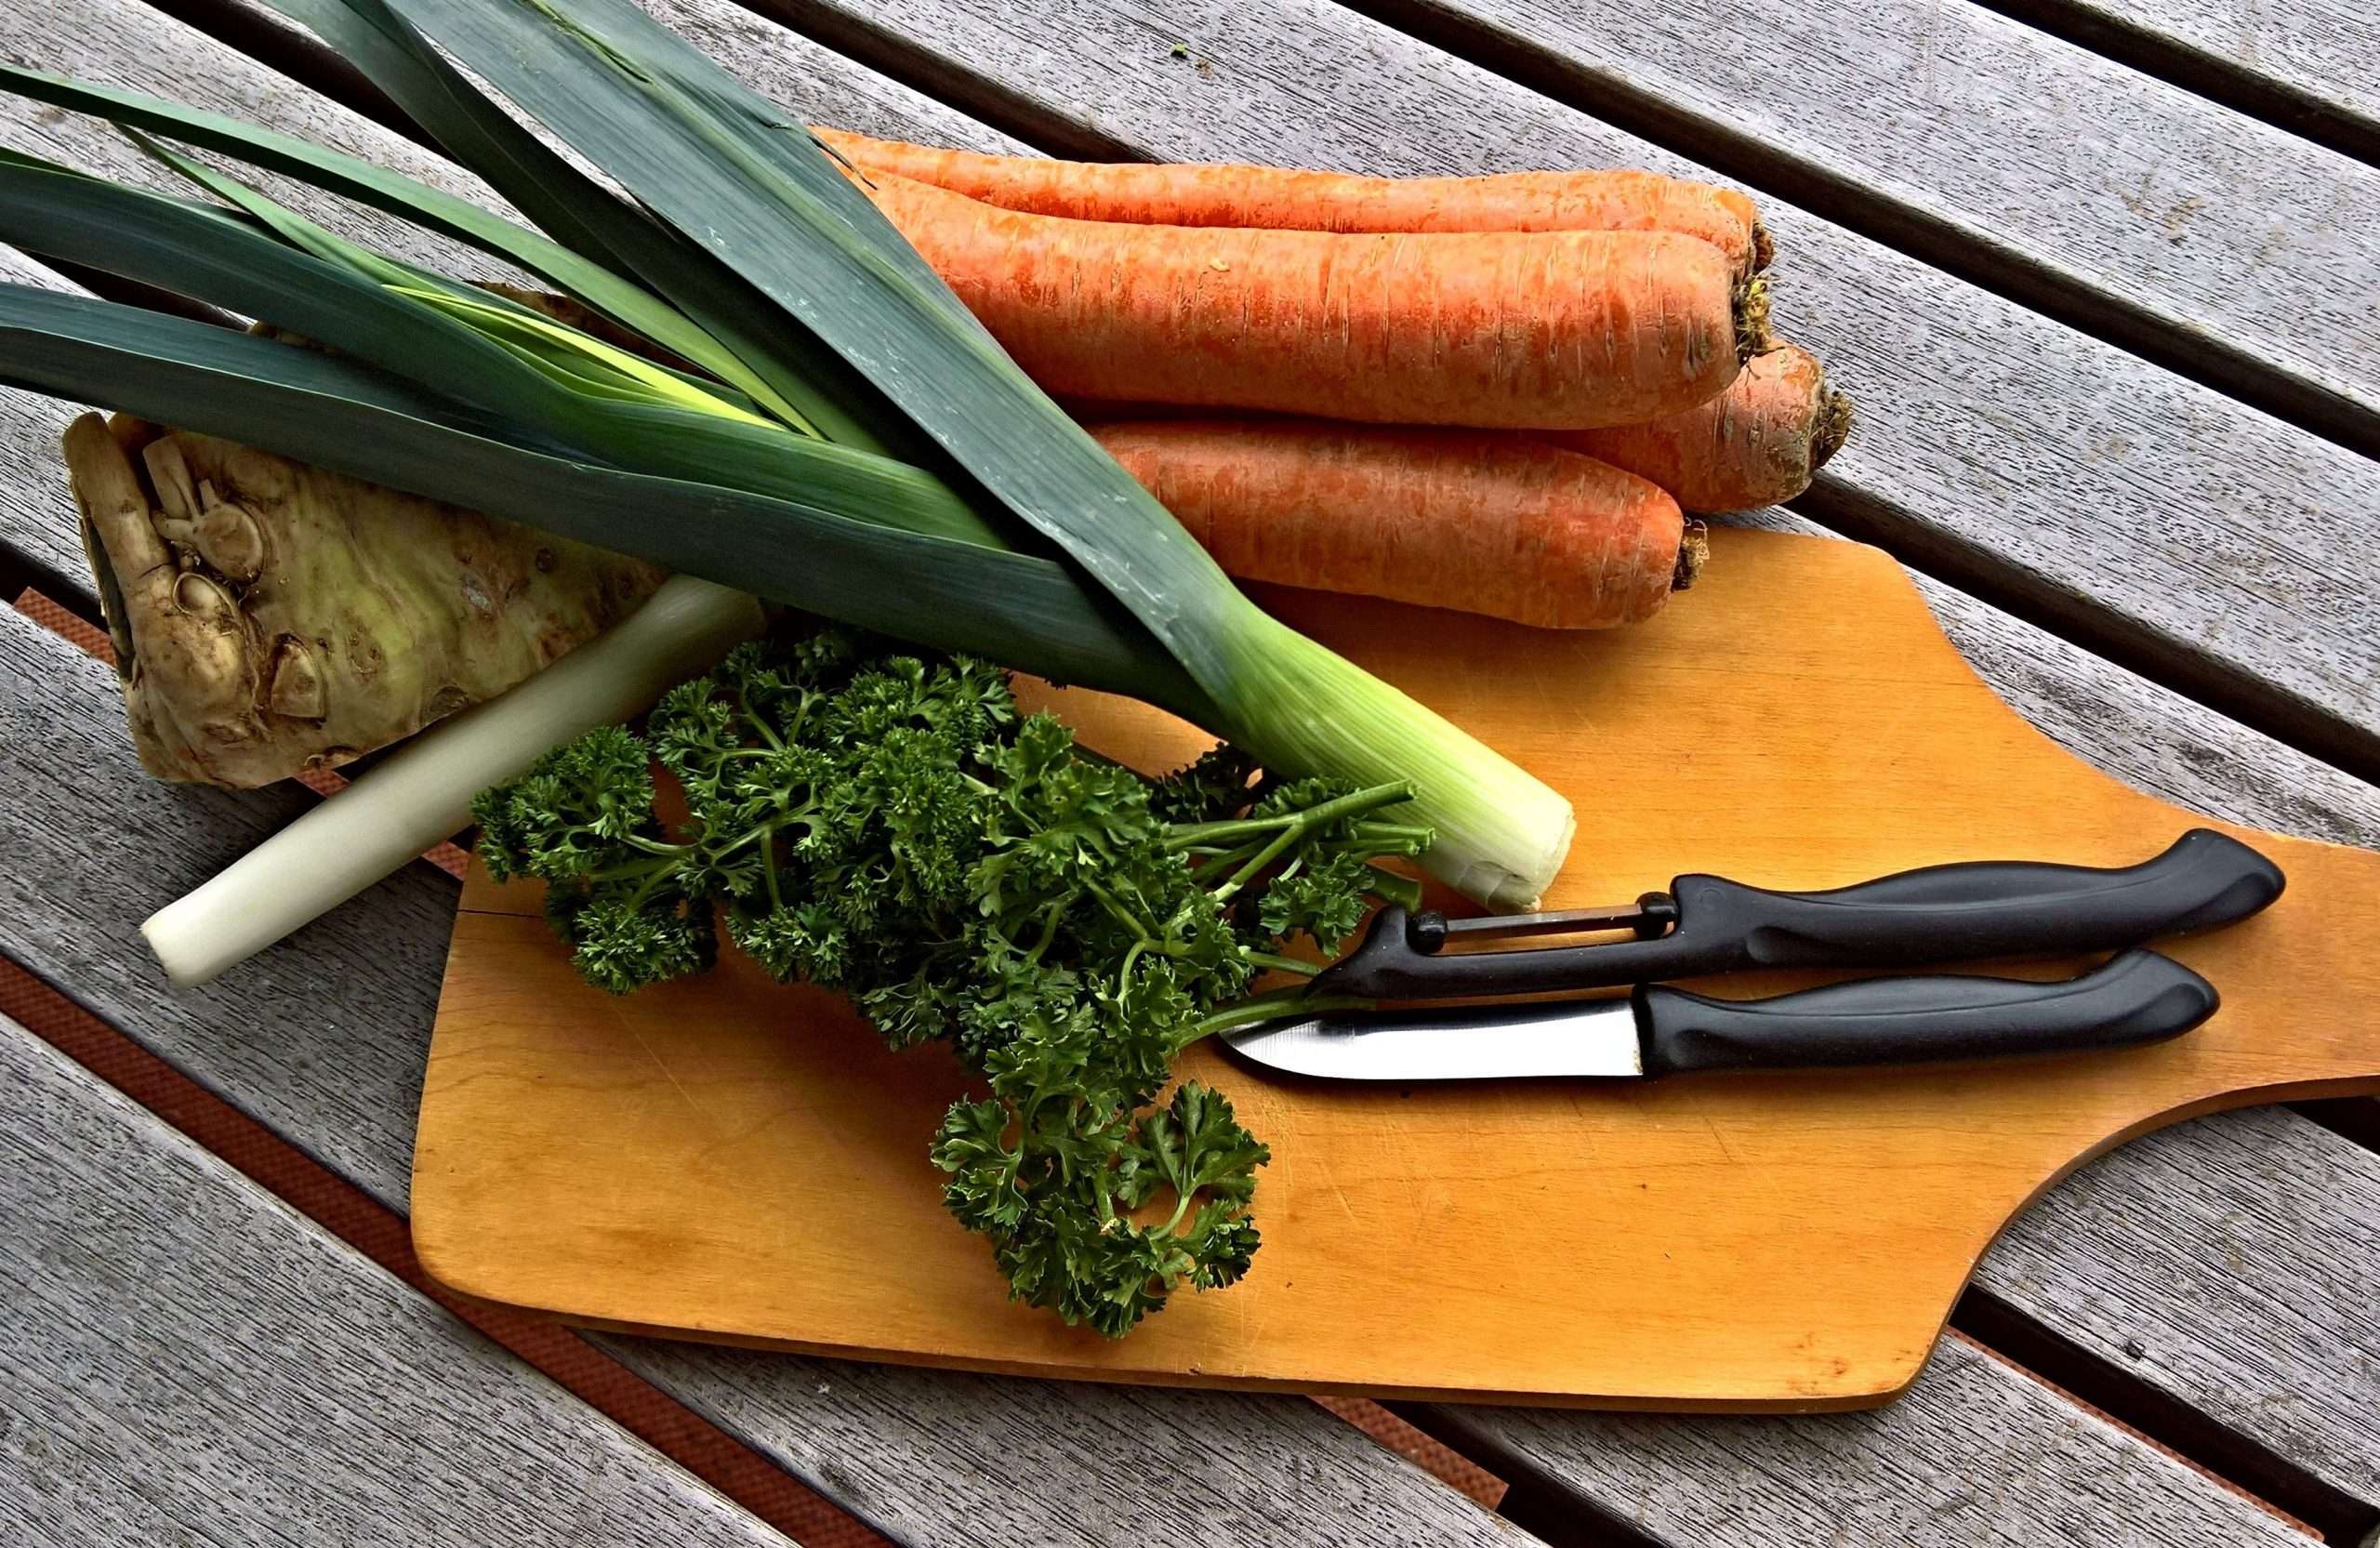 Leek, carrot and ginger on orange chopping board | Feature Image | Anti-Inflammatory Diet Recipes